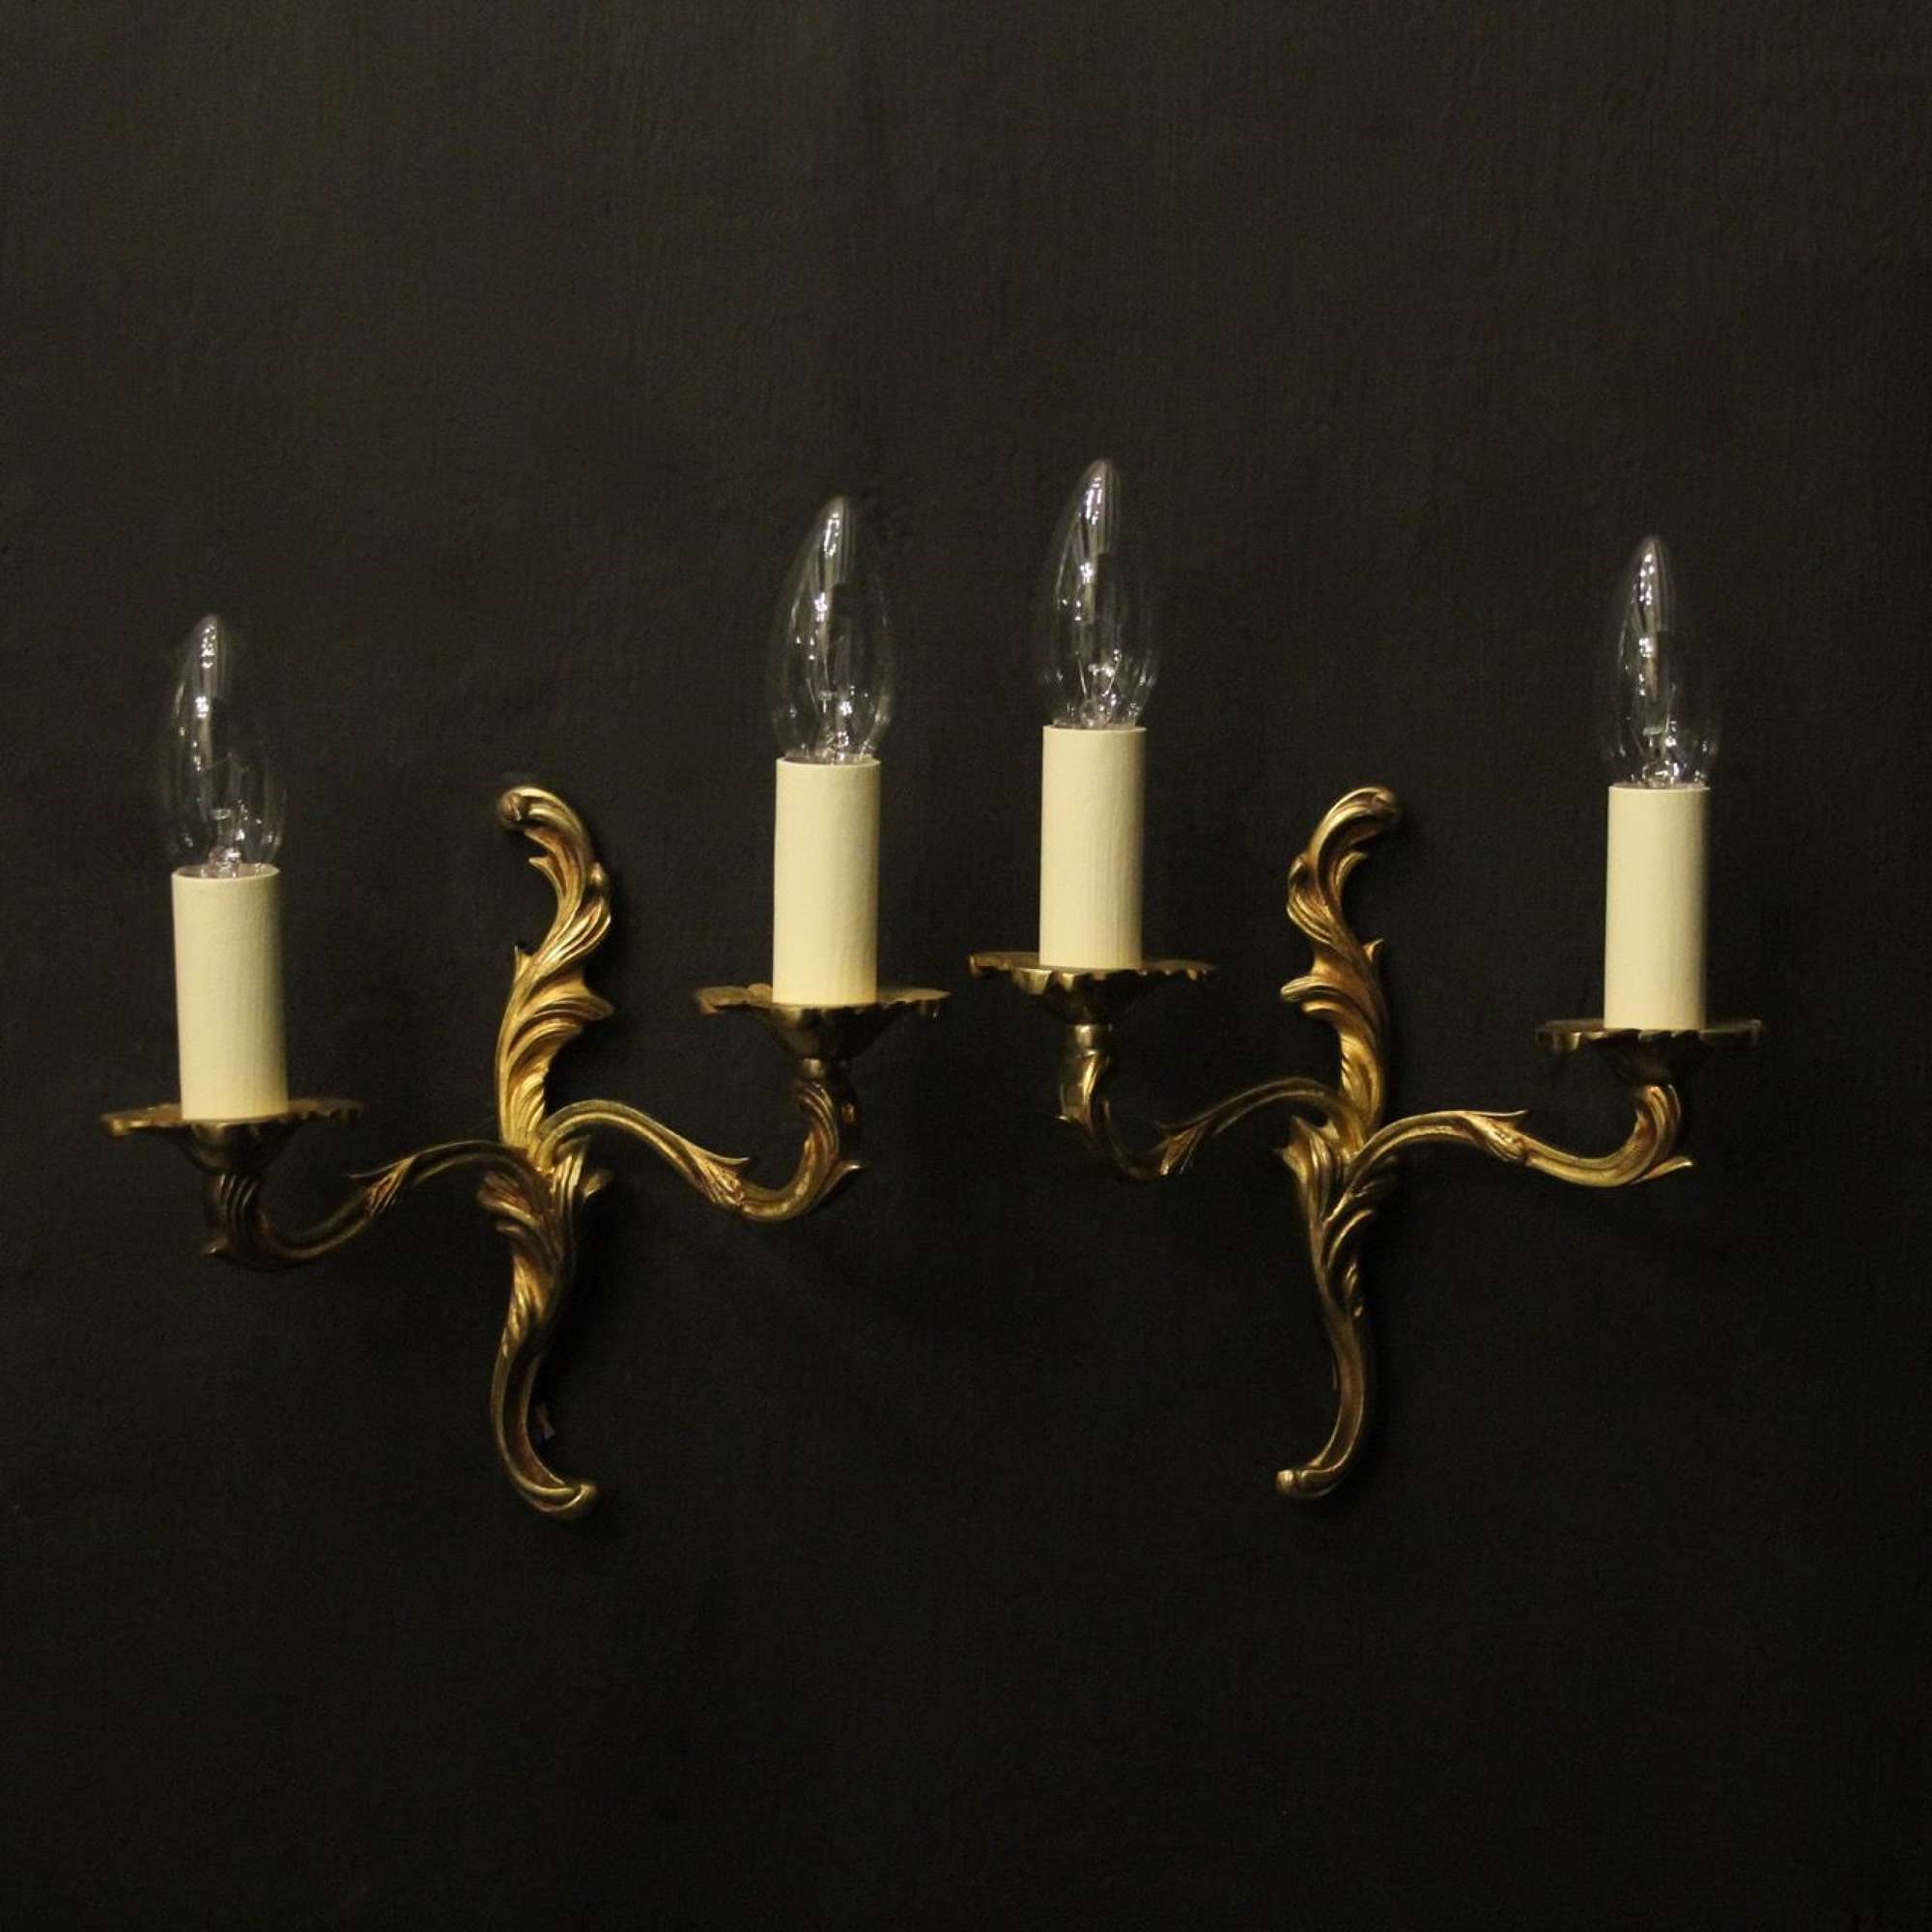 French Pair Of Gilded Antique Wall Lights